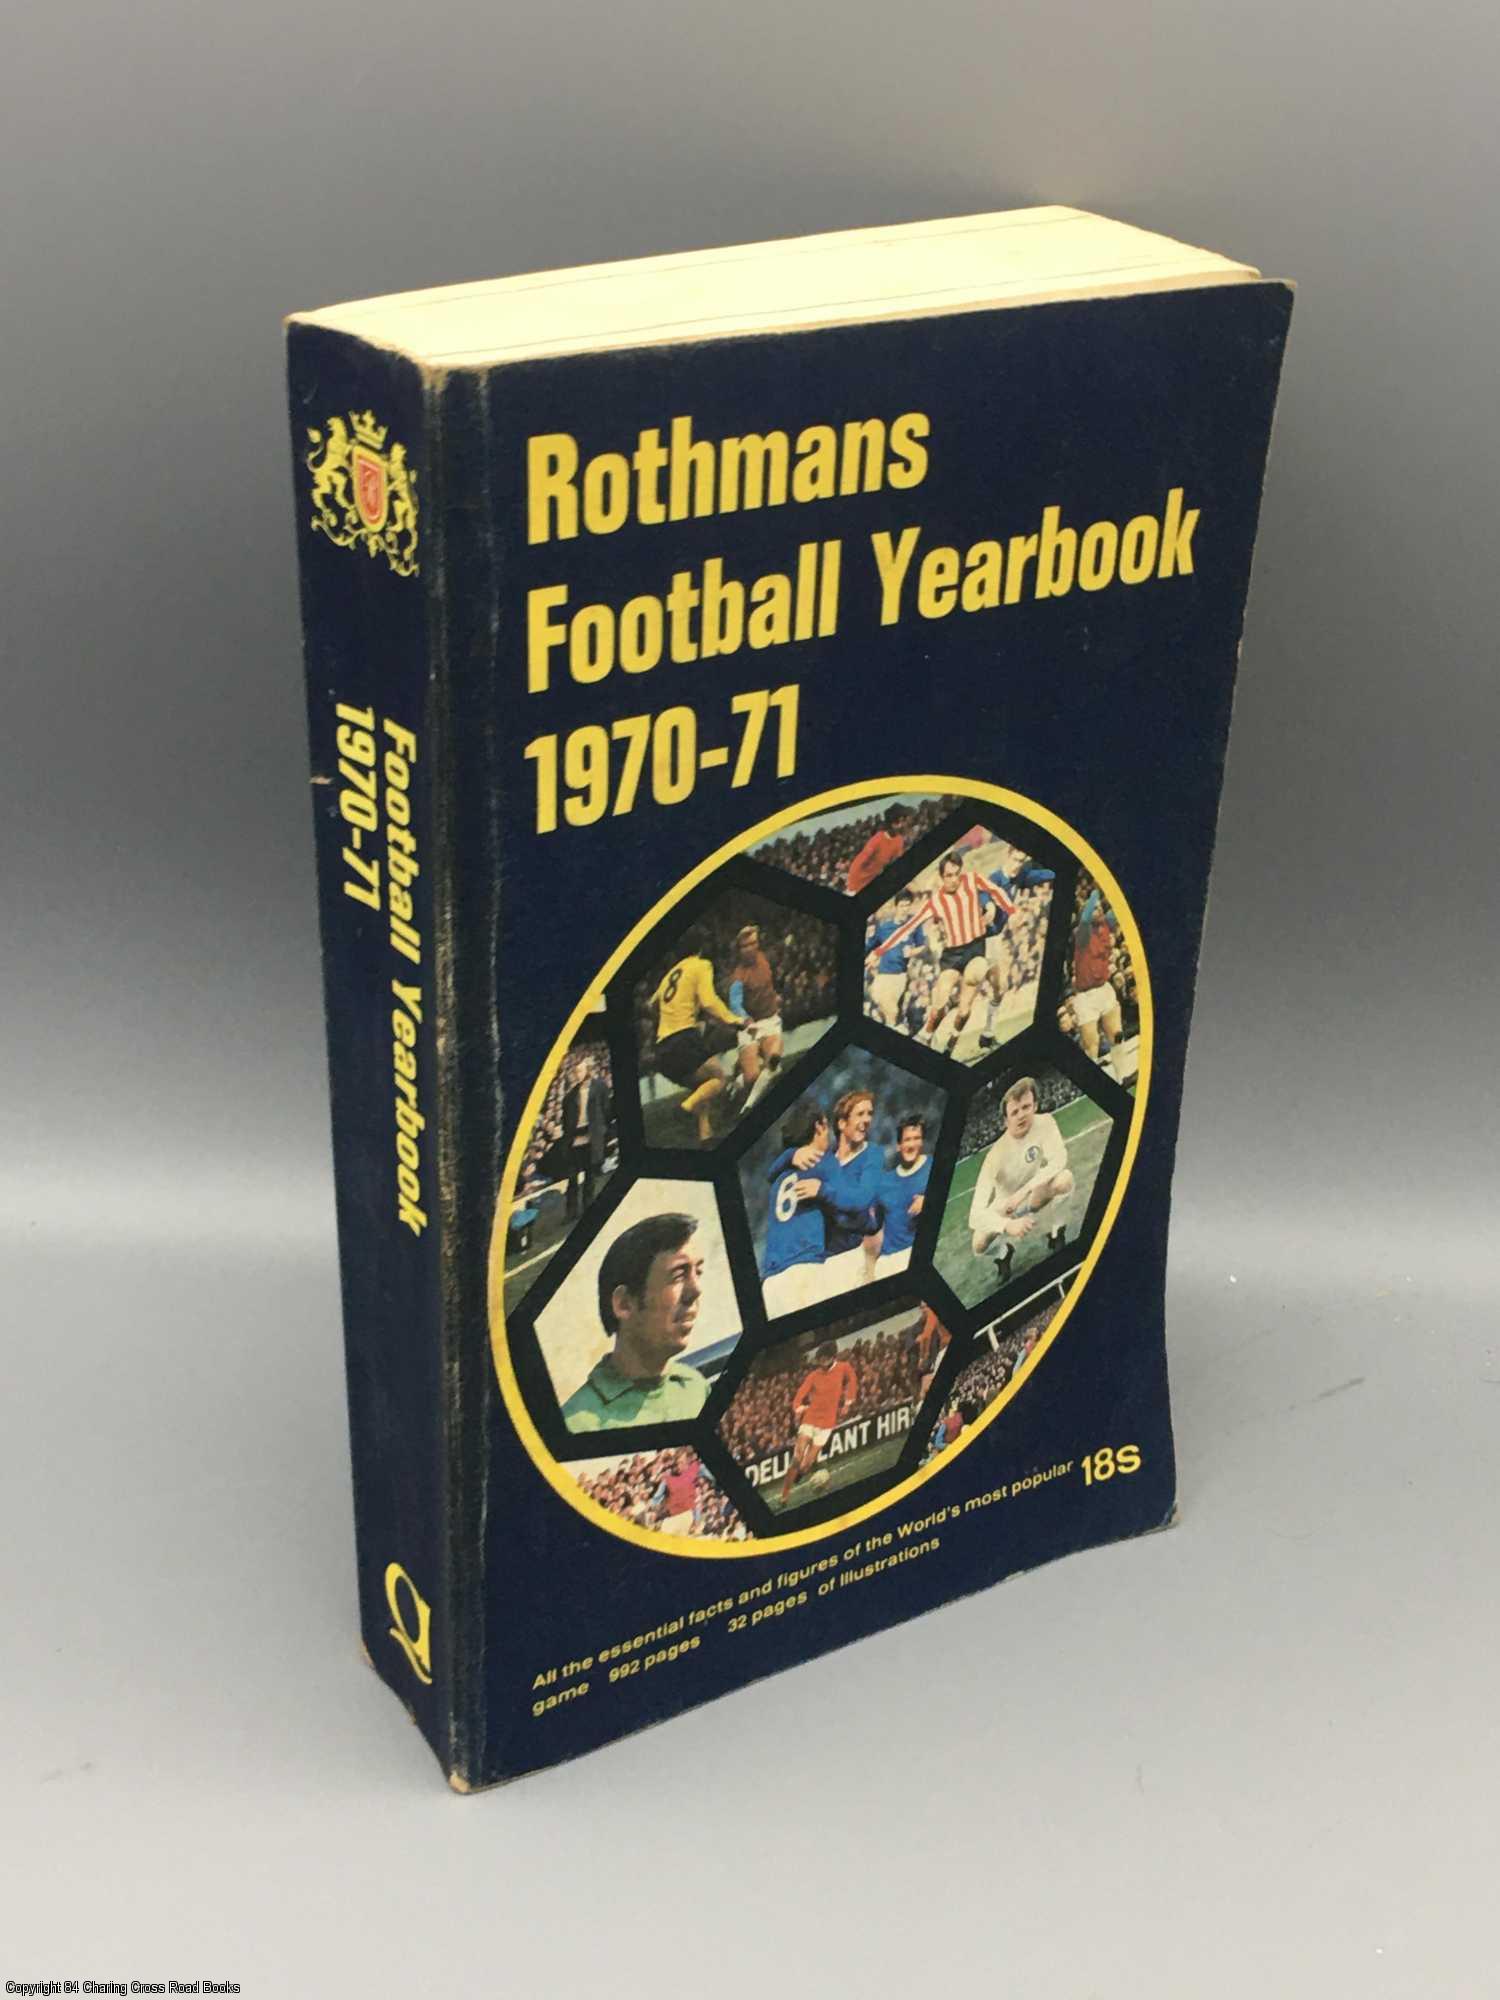 Rothmans Football Yearbook 1970-71 by Williams, Peskett on 84 Charing Cross  Rare Books